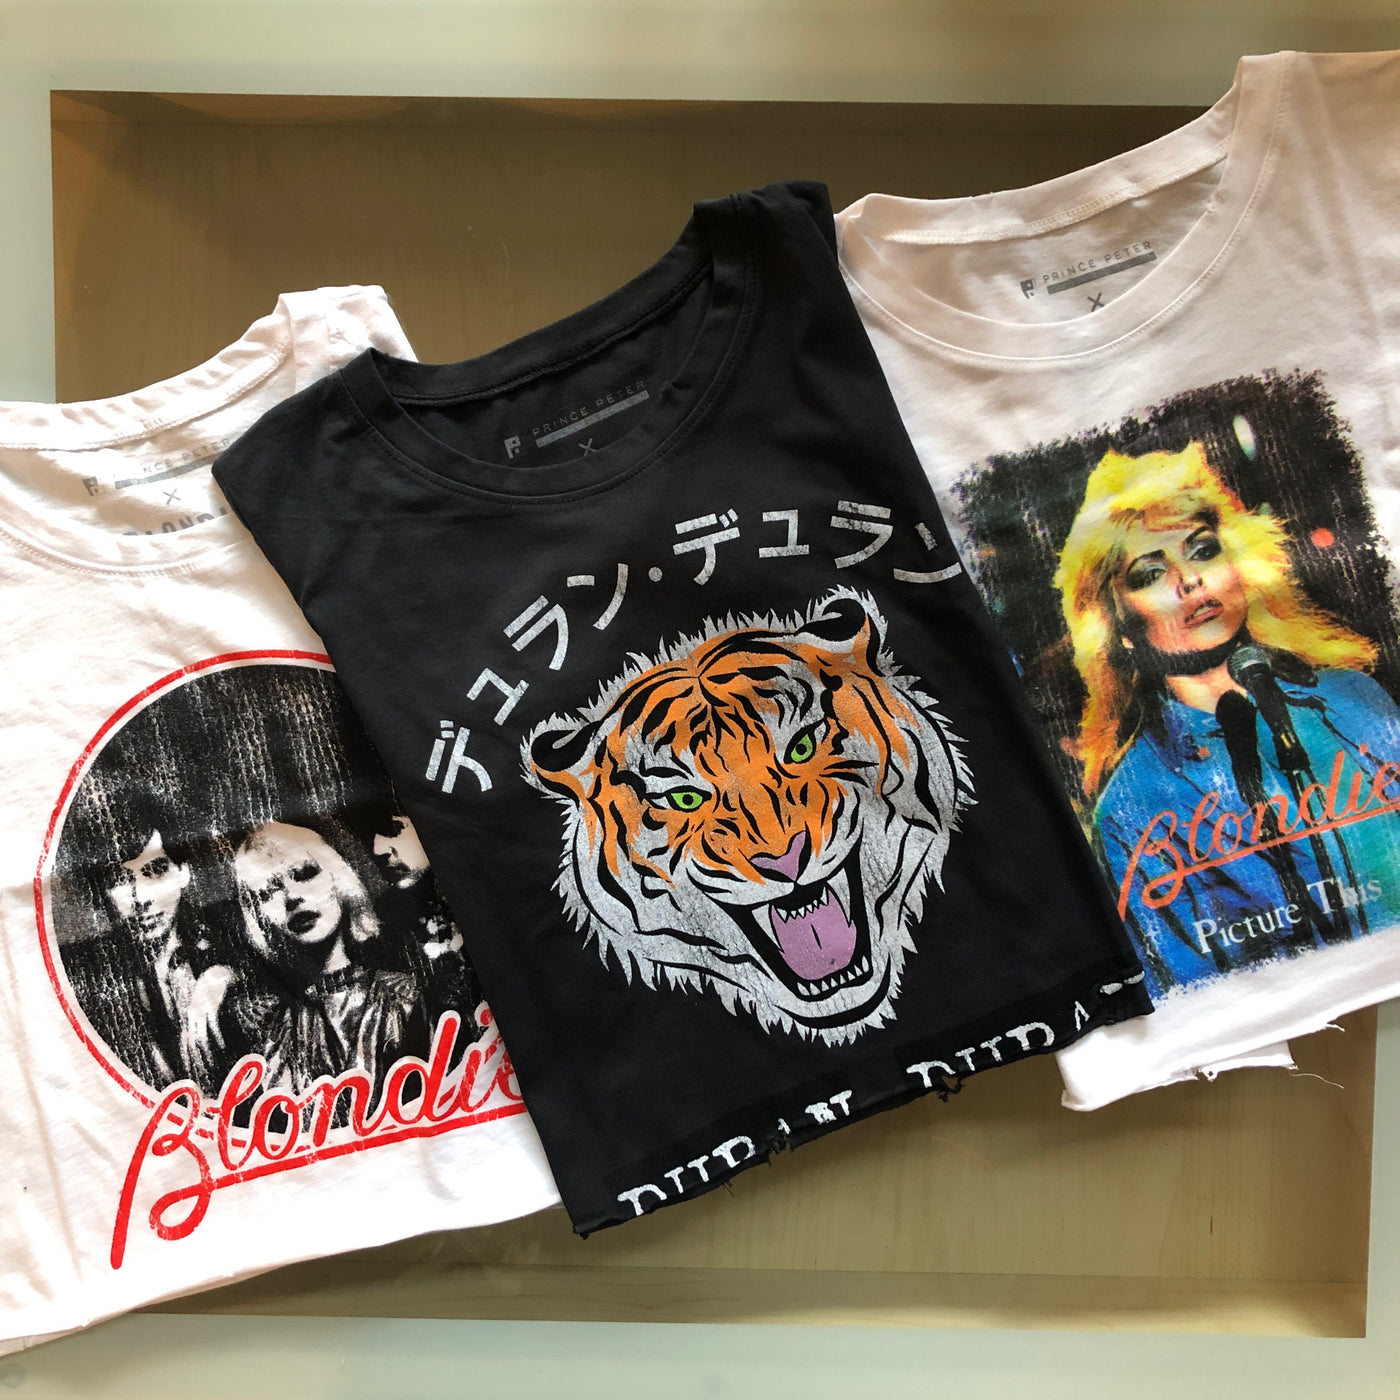 Blondie “Picture This” Cropped Concert Tee-T-shirt-Style Trolley